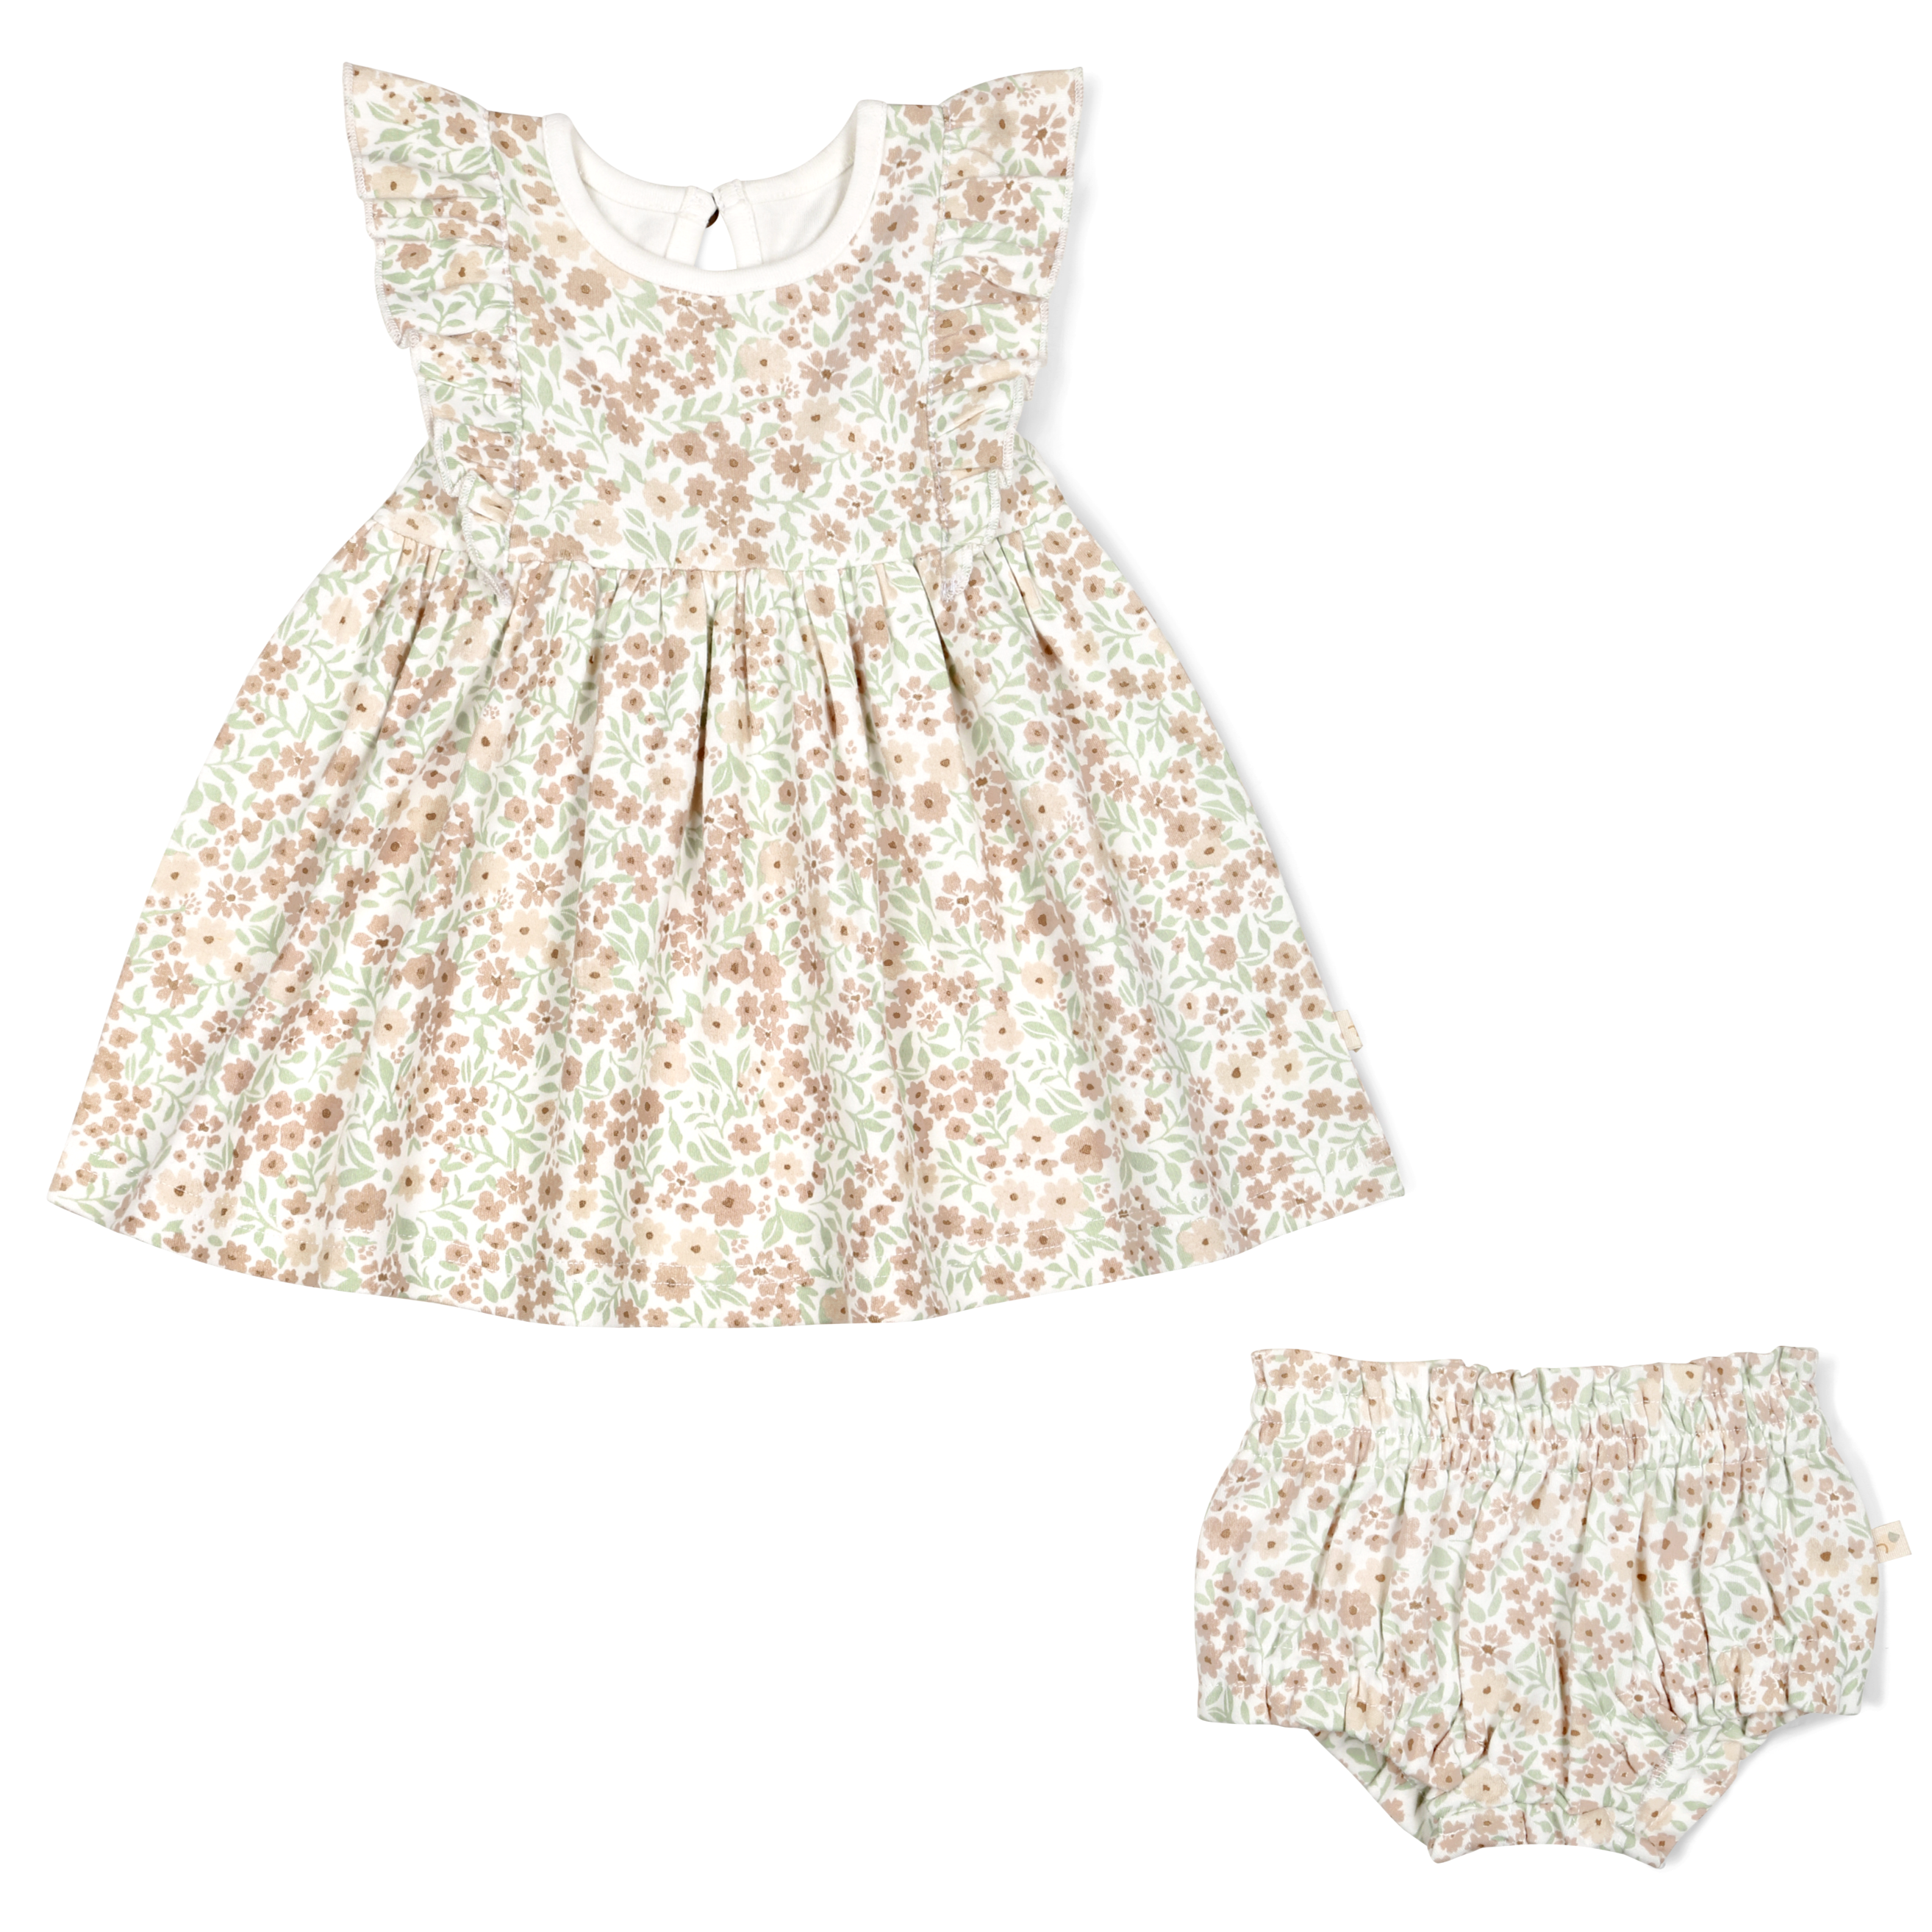 A Summer Floral Organic Flutter Dress with matching bloomers, displayed on a white background. The dress has sleeveless arms and a gathered waistline by Makemake Organics.